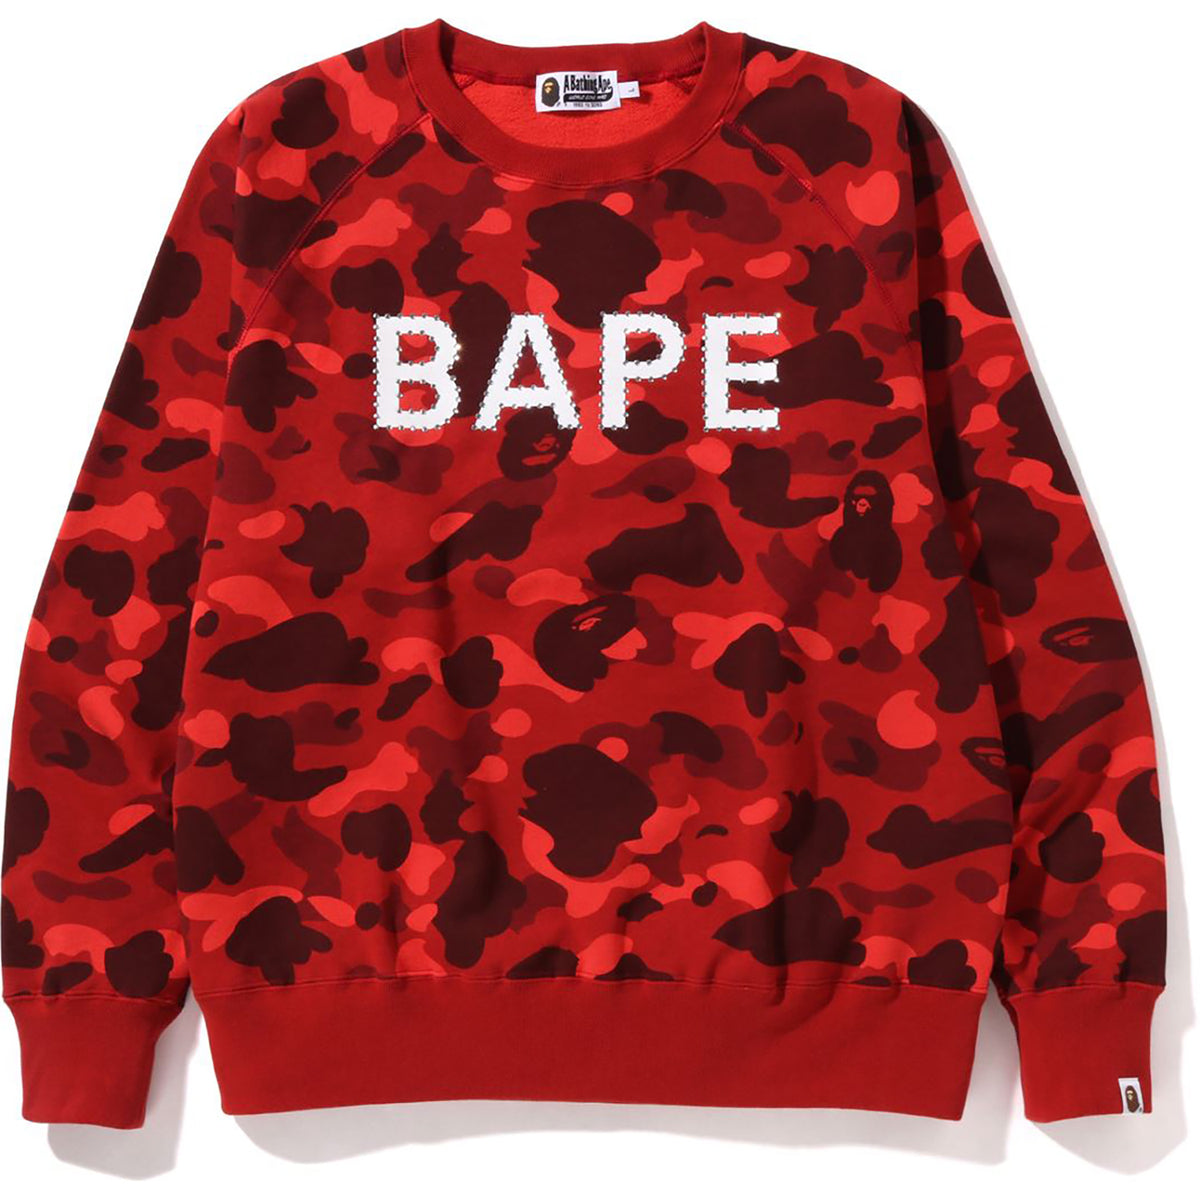 COLOR CAMO CRYSTAL STONE RELAXED FIT CREWNECK MENS